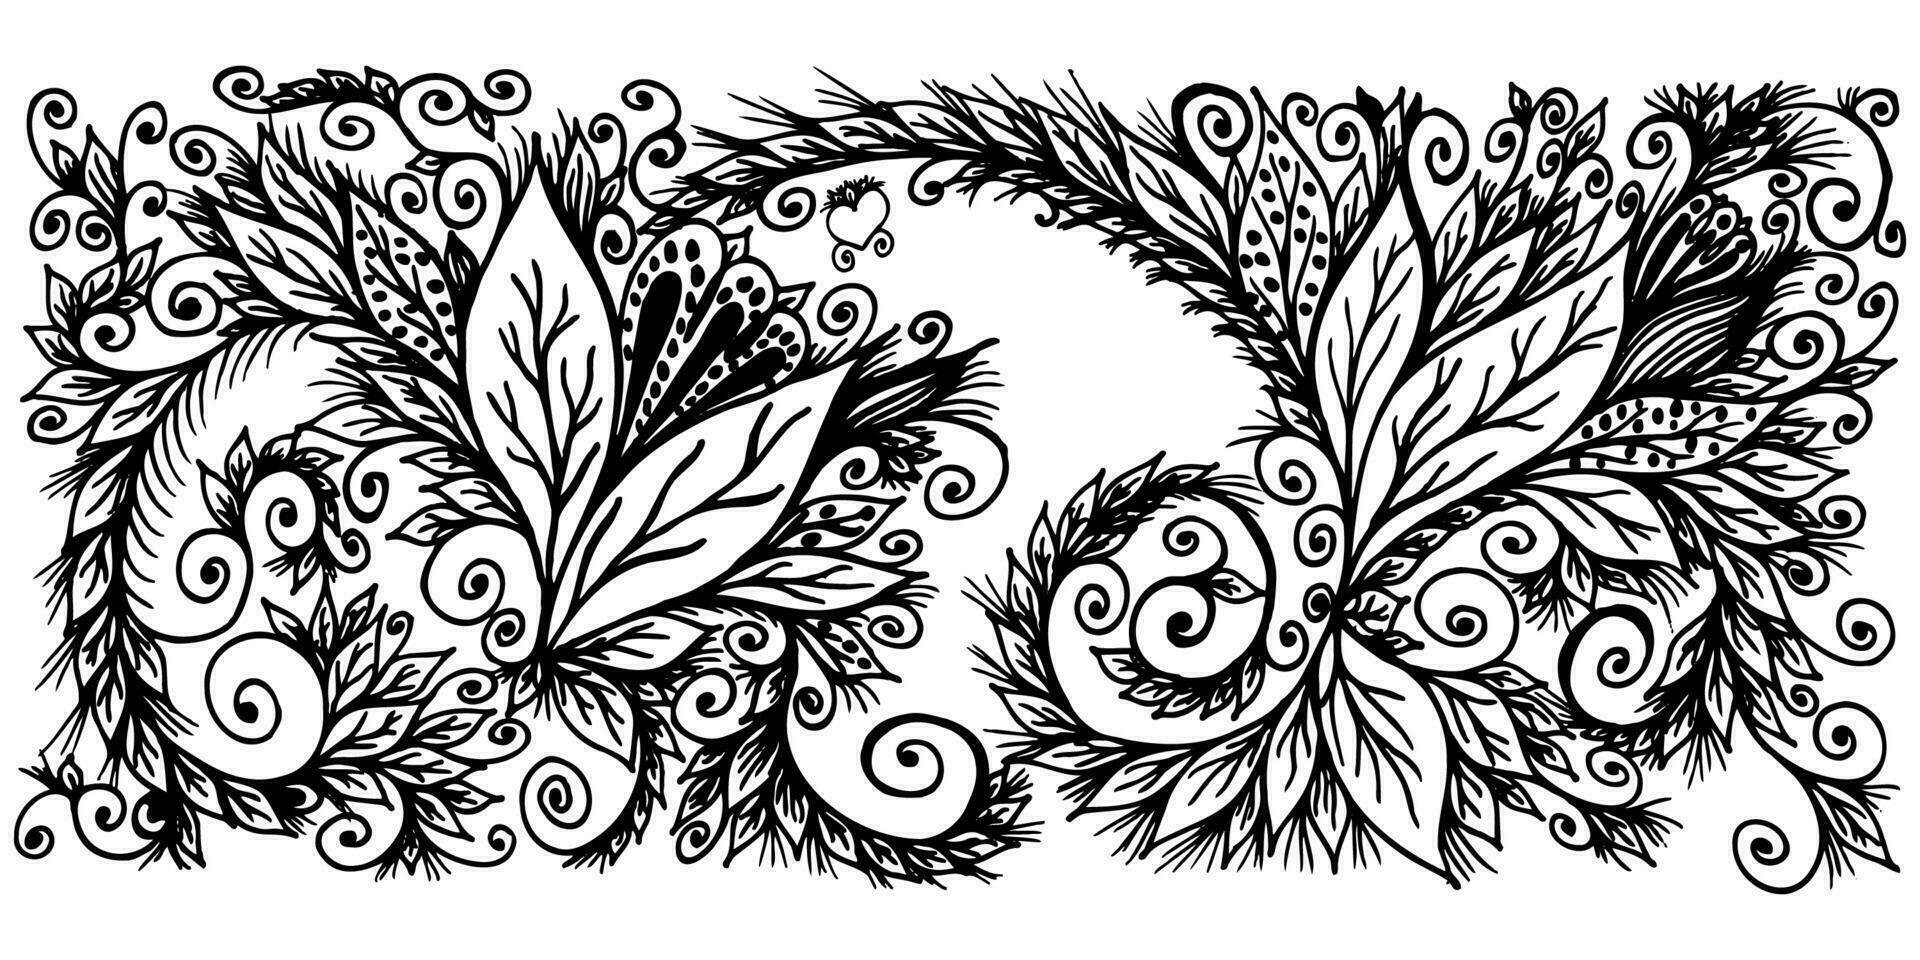 Graphic swirls monochrome ornament with abstract flowers decorative doodle background vector